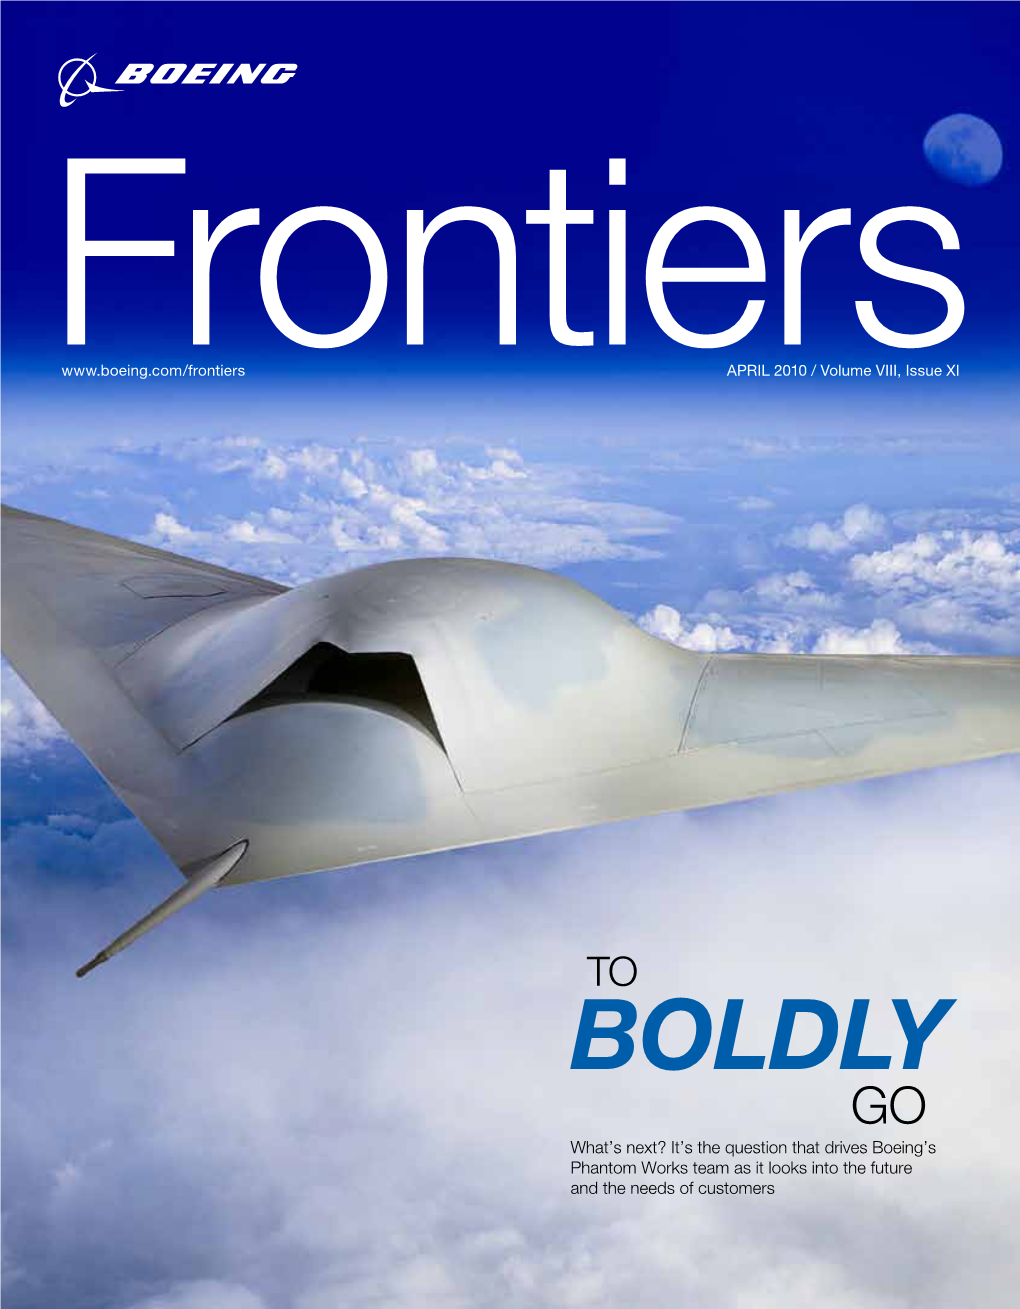 Boldly Go What’S Next? It’S the Question That Drives Boeing’S Phantom Works Team As It Looks Into the Future and the Needs of Customers